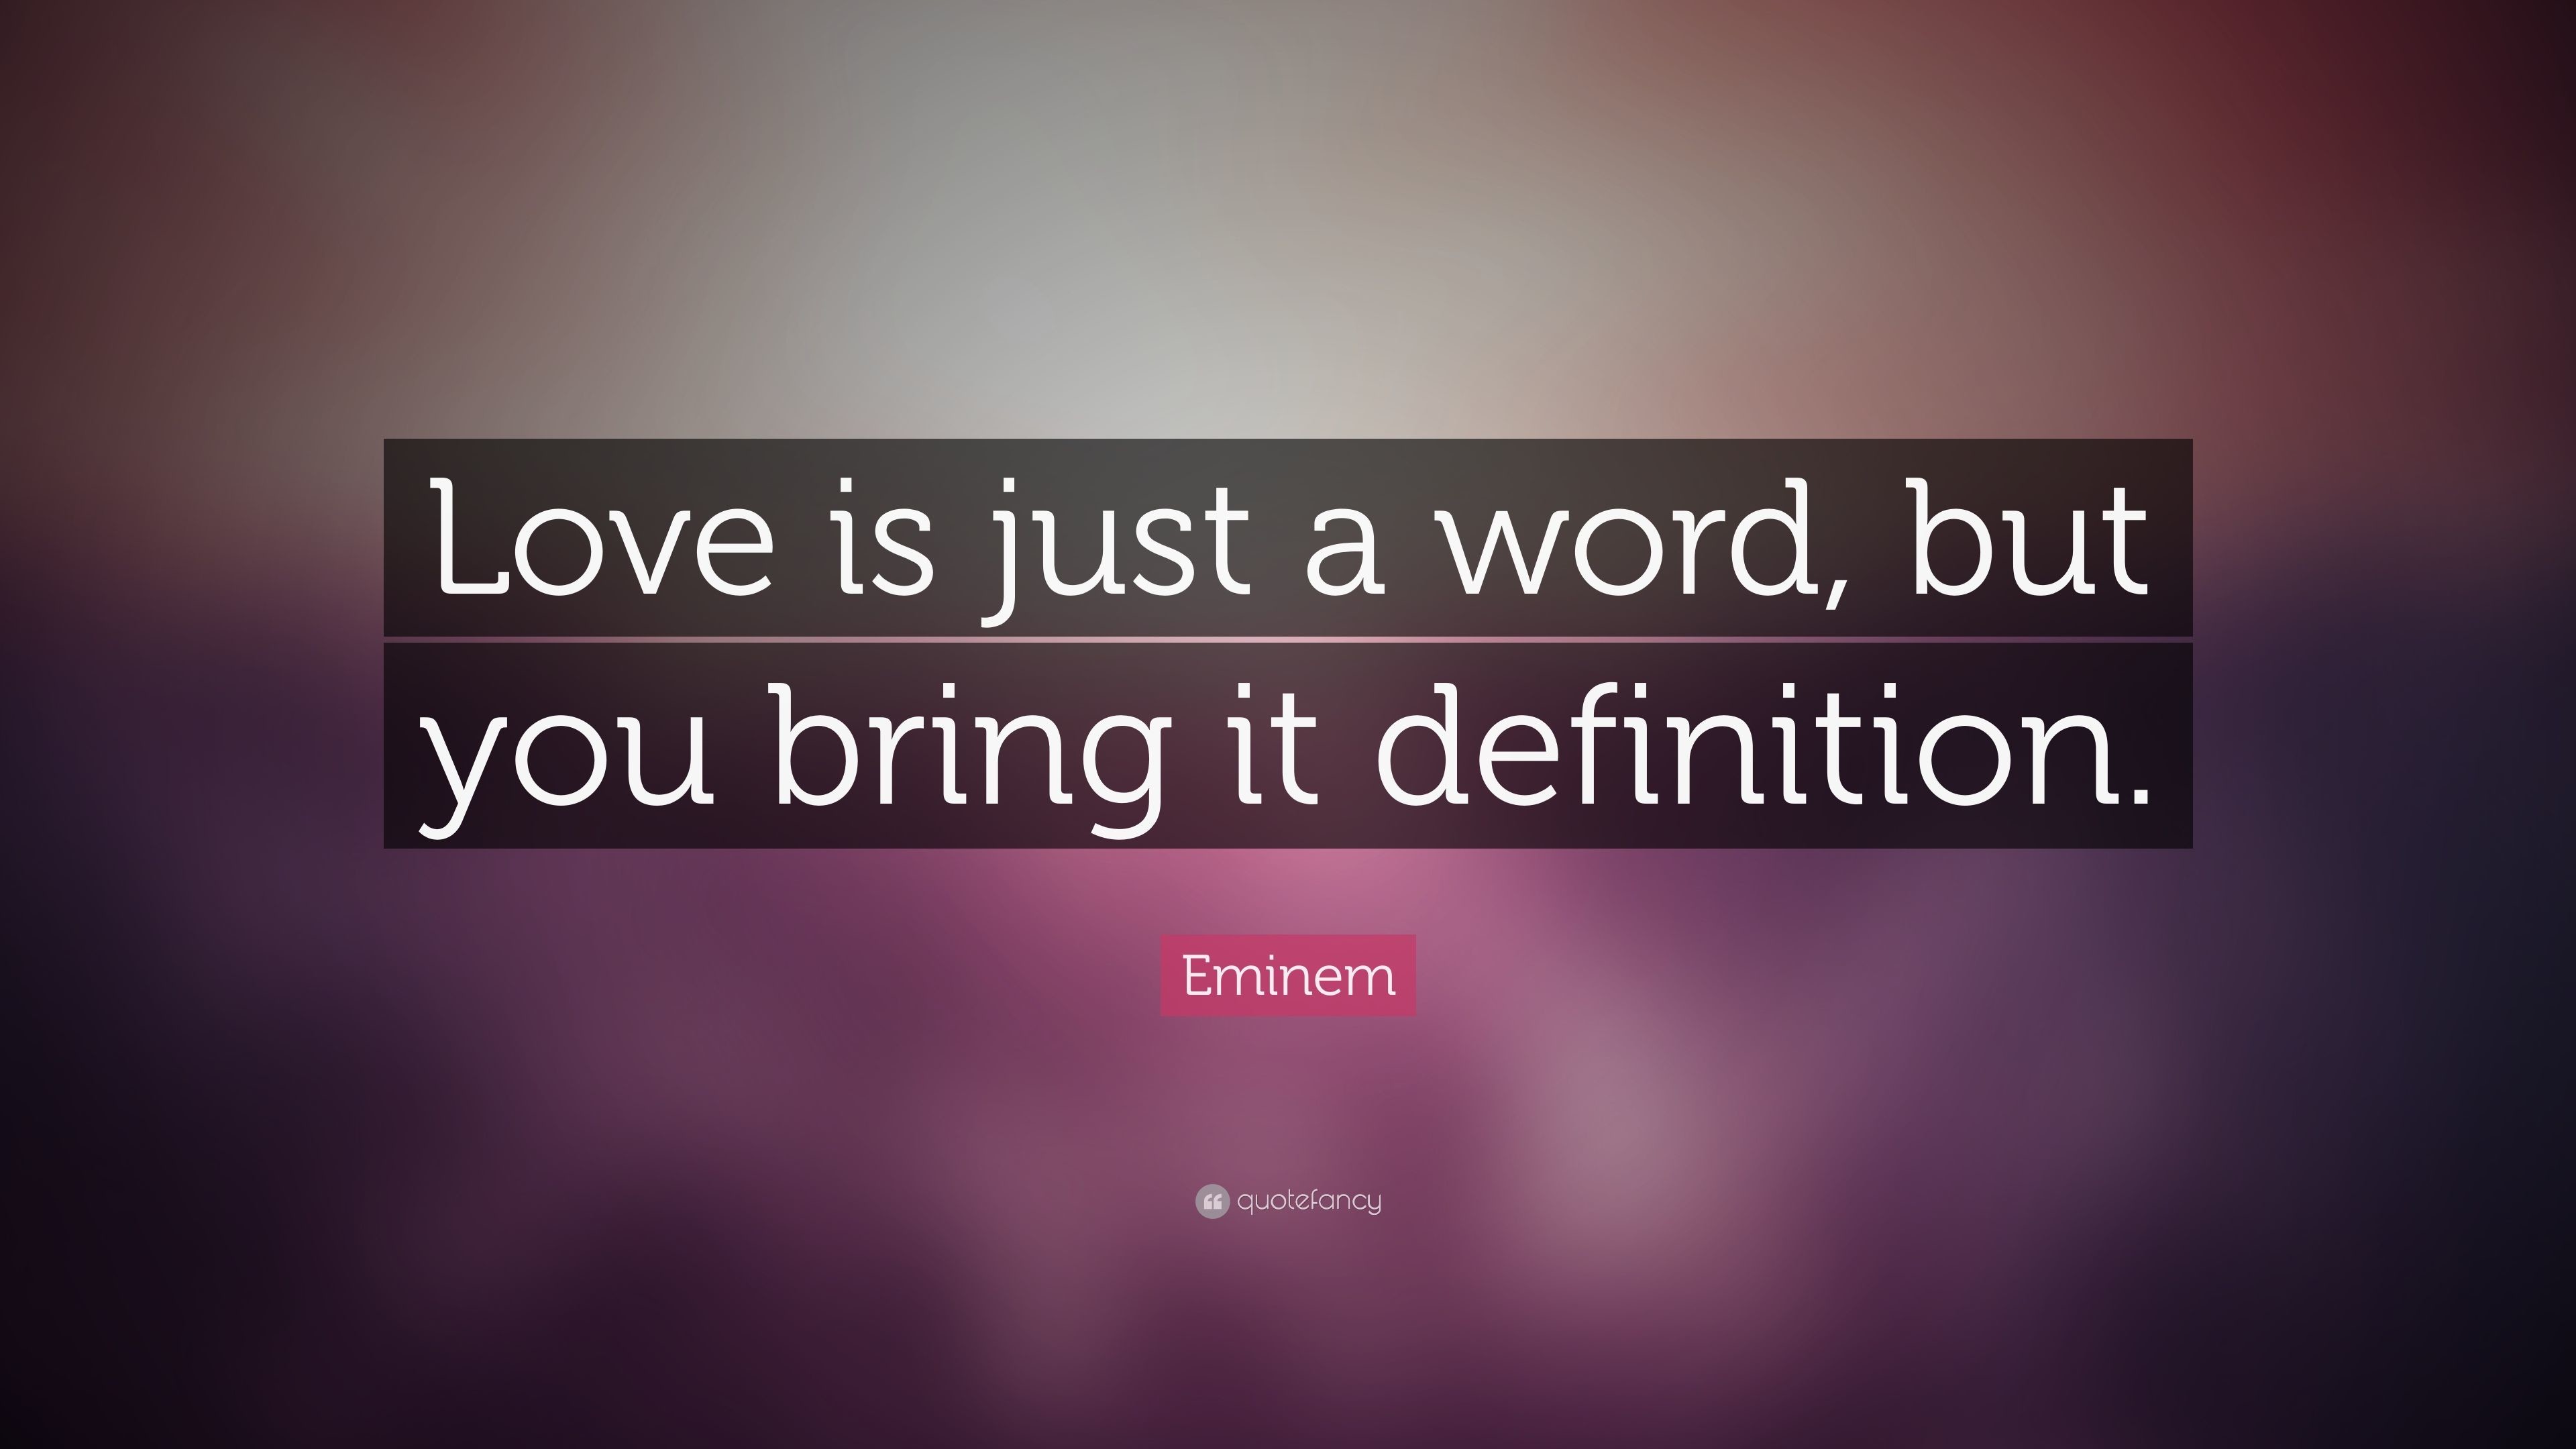 Eminem Quote Love is just a word, but you bring it definition